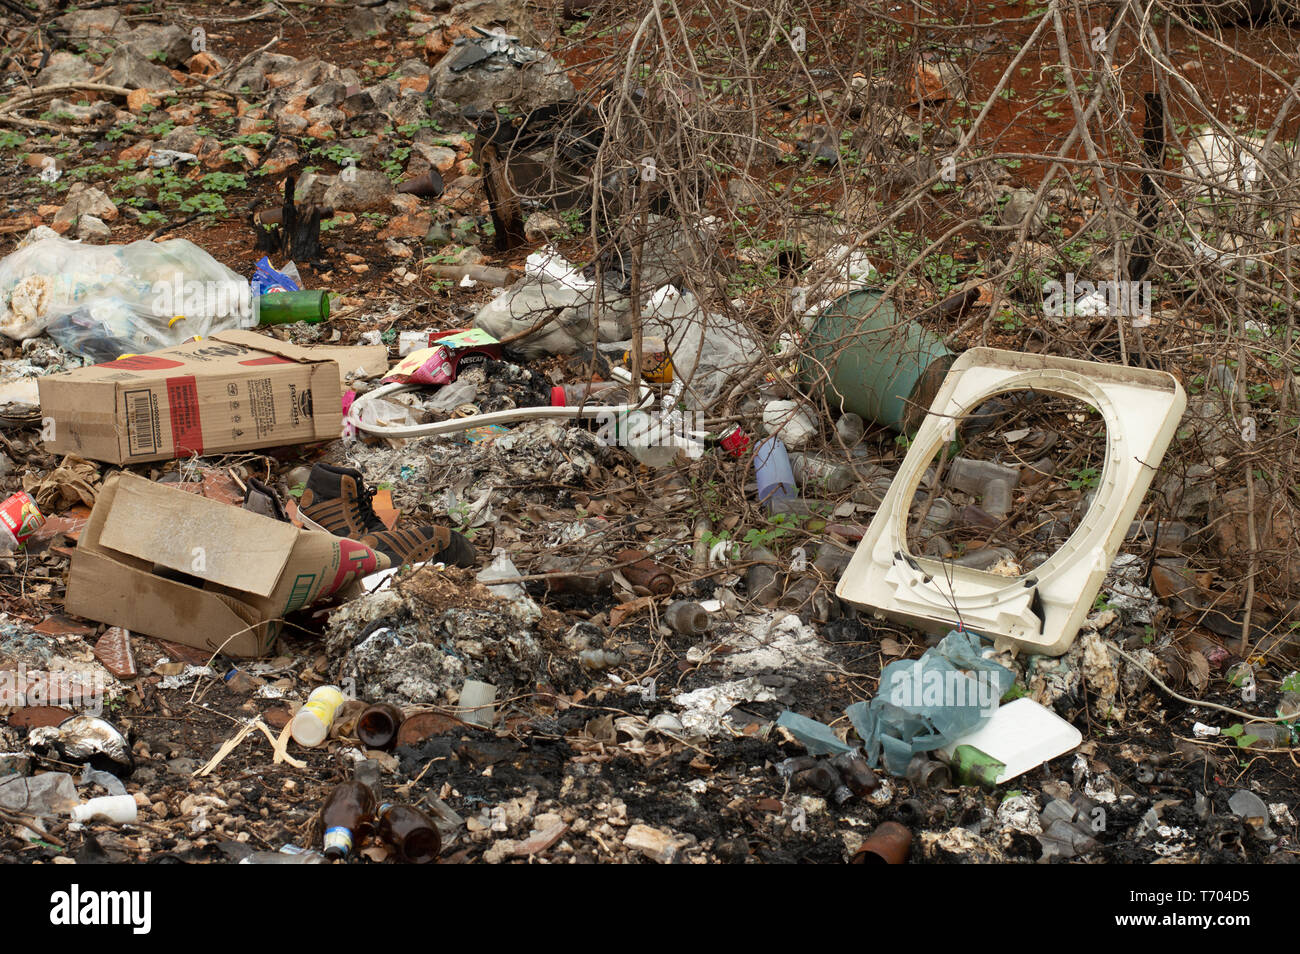 Dump on the side of the road in Yucatan, Mexico. We can see glass bottles, plastic objects and bags, and other pollutants. Stock Photo